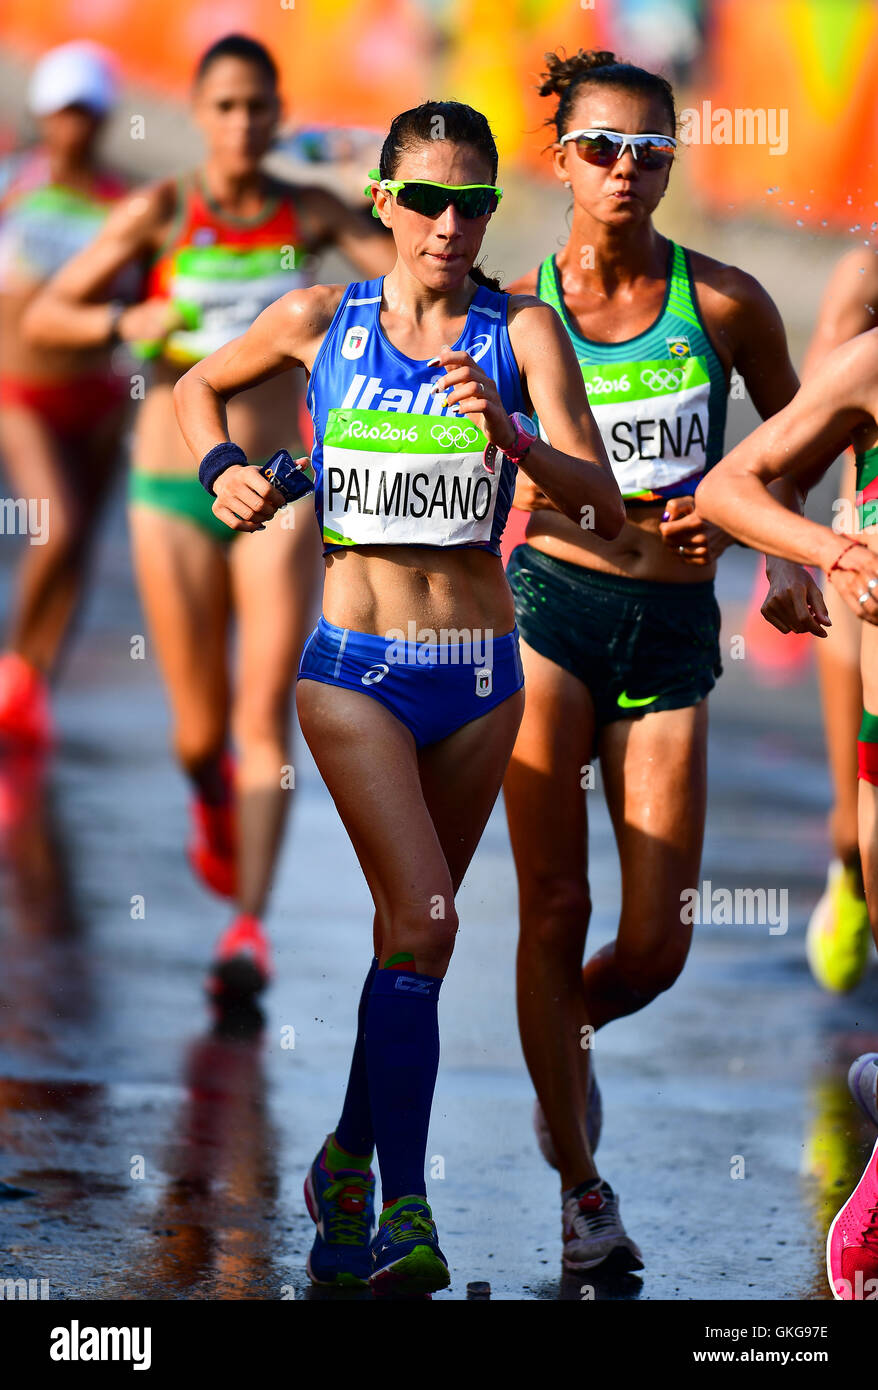 Rio de Janeiro, Brazil. 19th August, 2016. Antonella Palmisano of Italy during the womens 20km race walk on Day 14 of the 2016 Rio Olympics at Pontal on August 19, 2016 in Rio de Janeiro, Brazil. (Photo by Roger Sedres/Gallo Images) Credit:  Roger Sedres/Alamy Live News Stock Photo